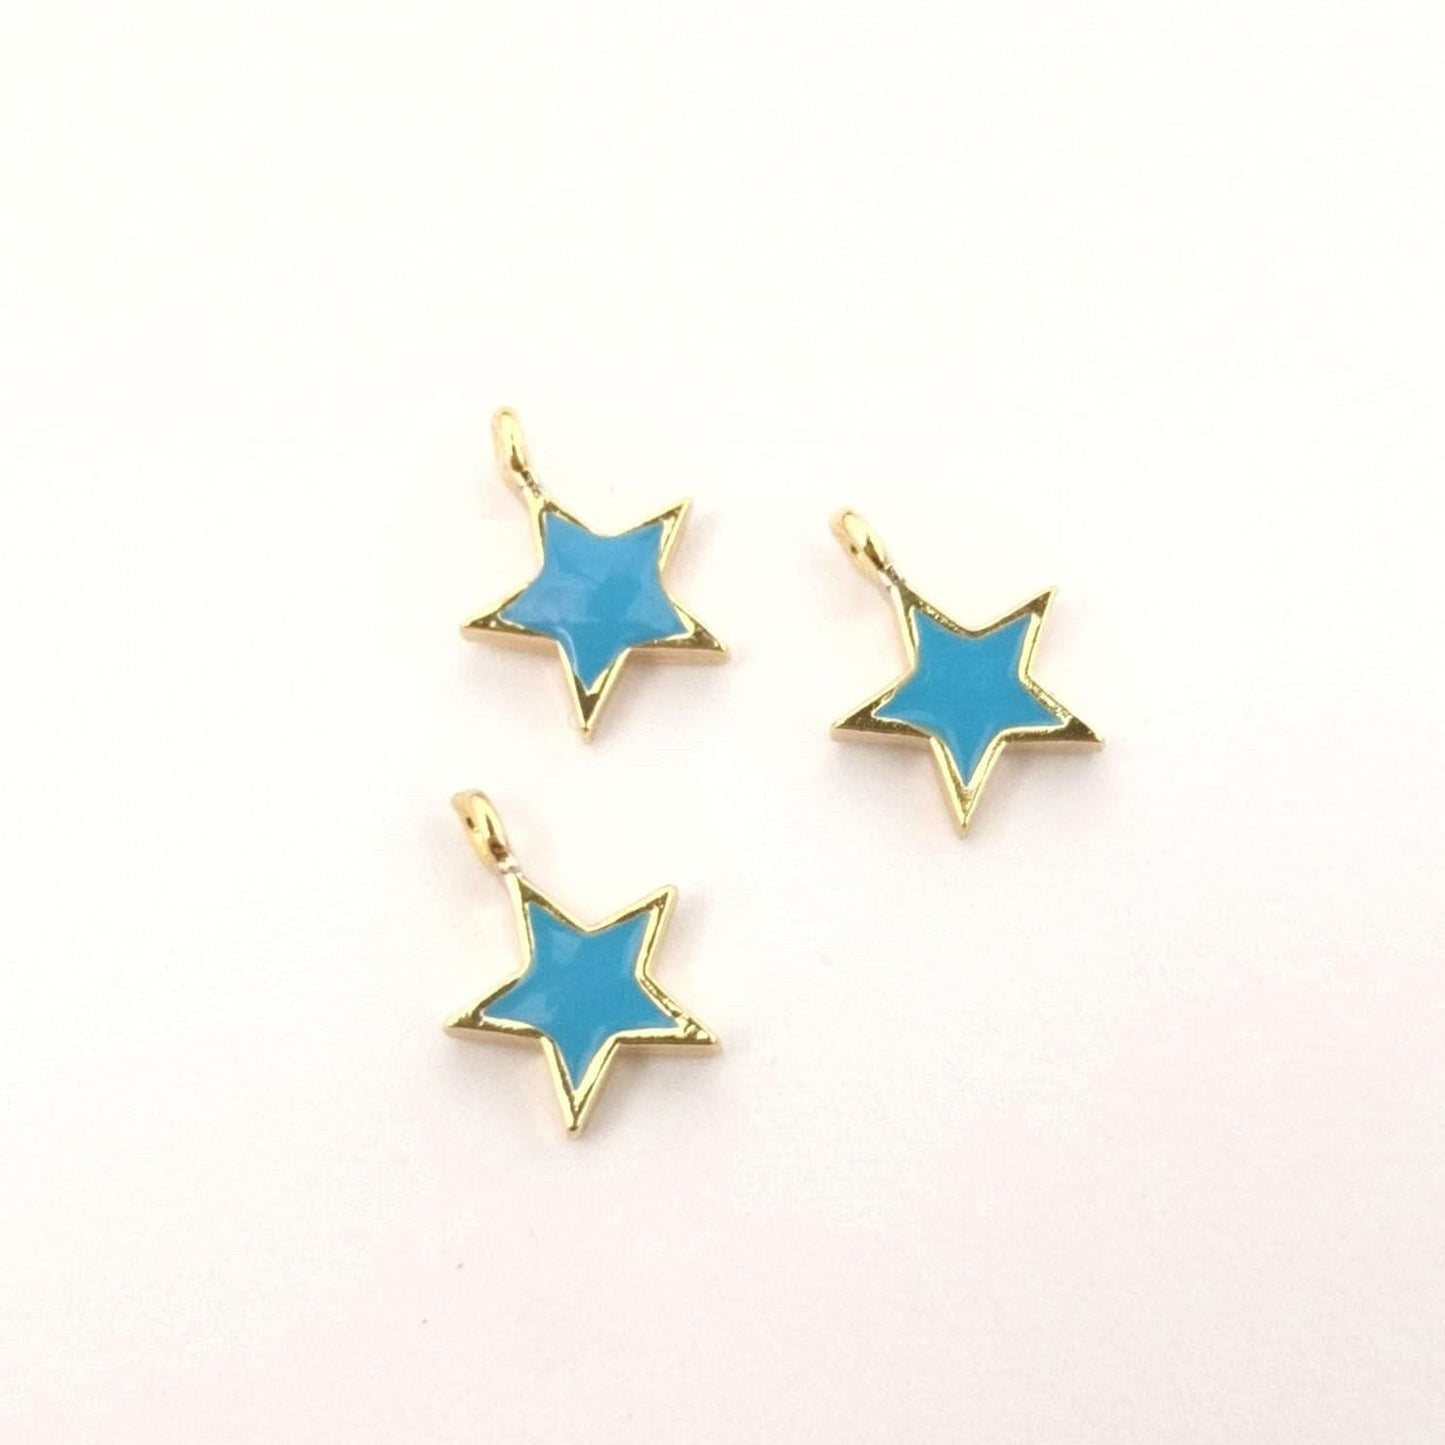 Gold Plated Enameled Star Shaking Attachment - Turquoise